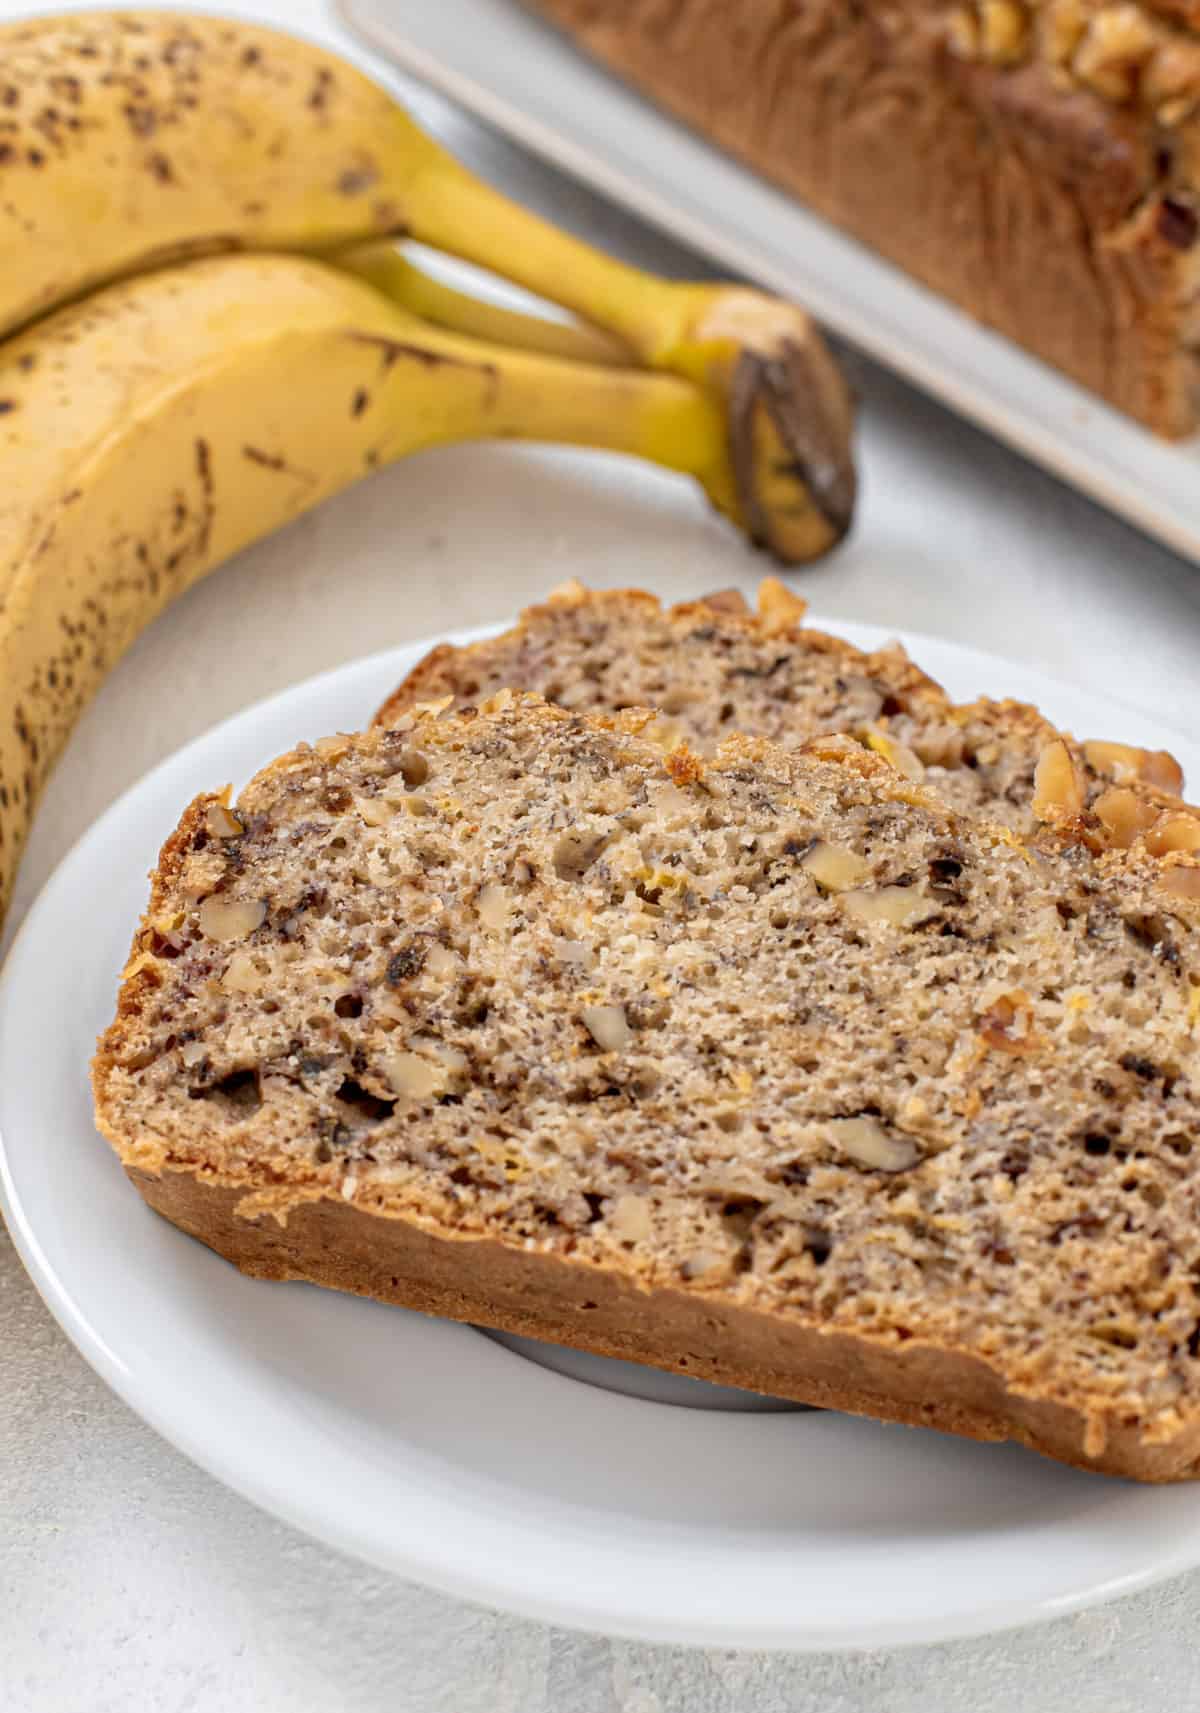 two slices of homemade banana walnut bread on a plate